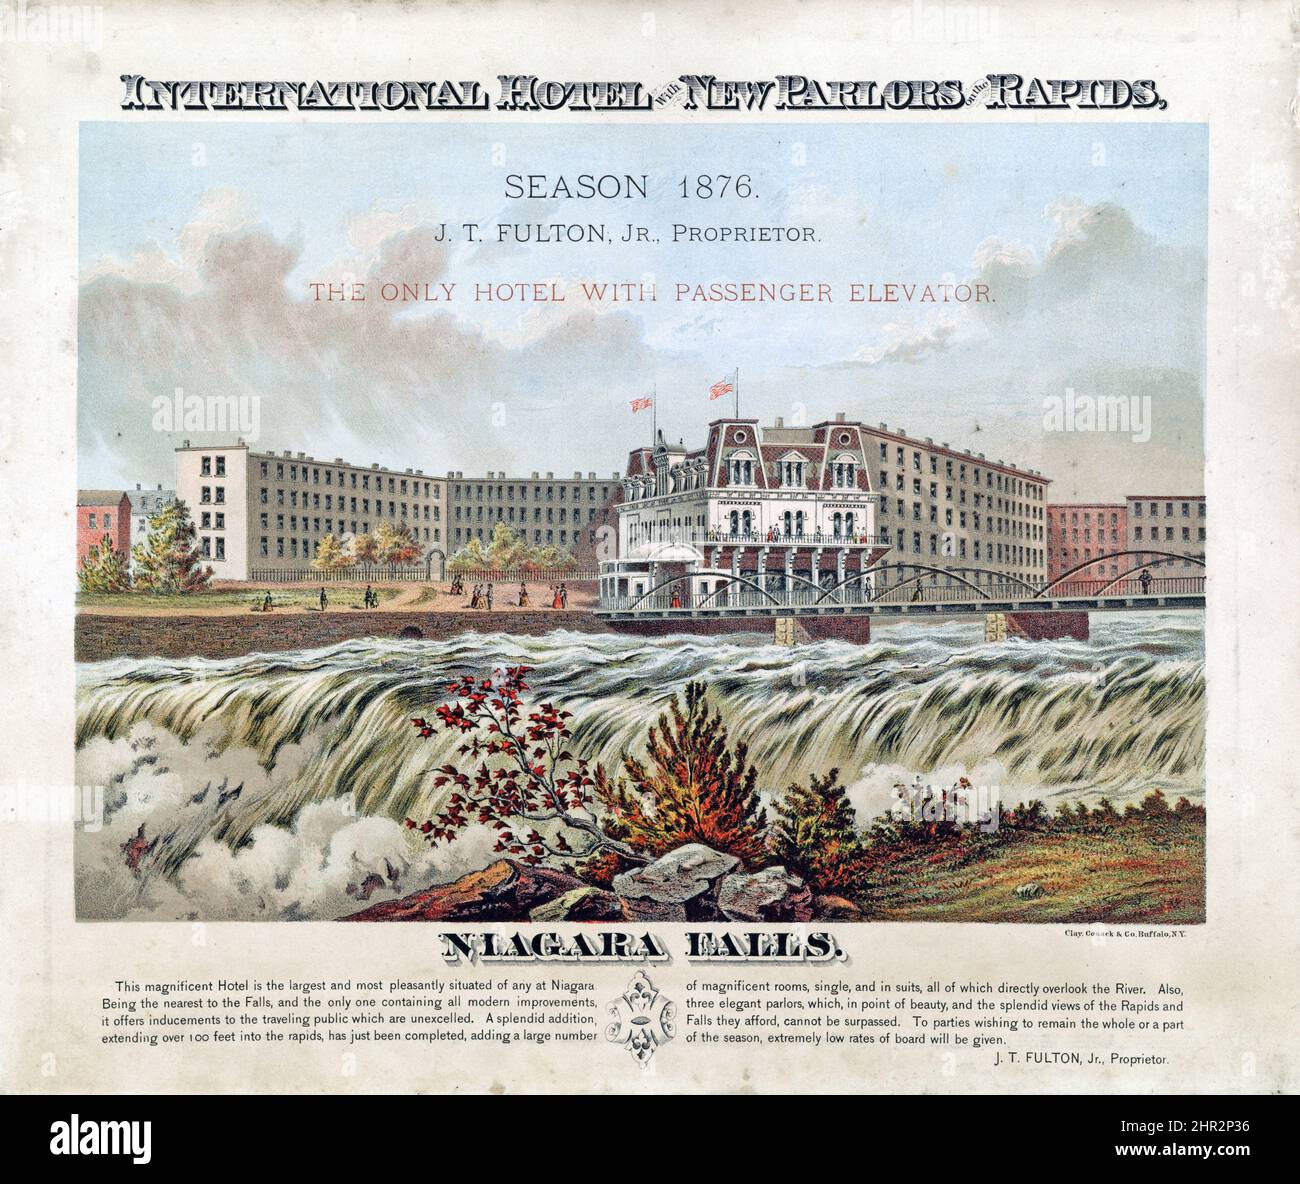 International Hotel with new parlors on the rapids - season 1876 - J.T. Fulton, Jr Proprietor - the only hotel with passenger elevator - Niagara Falls Stock Photo